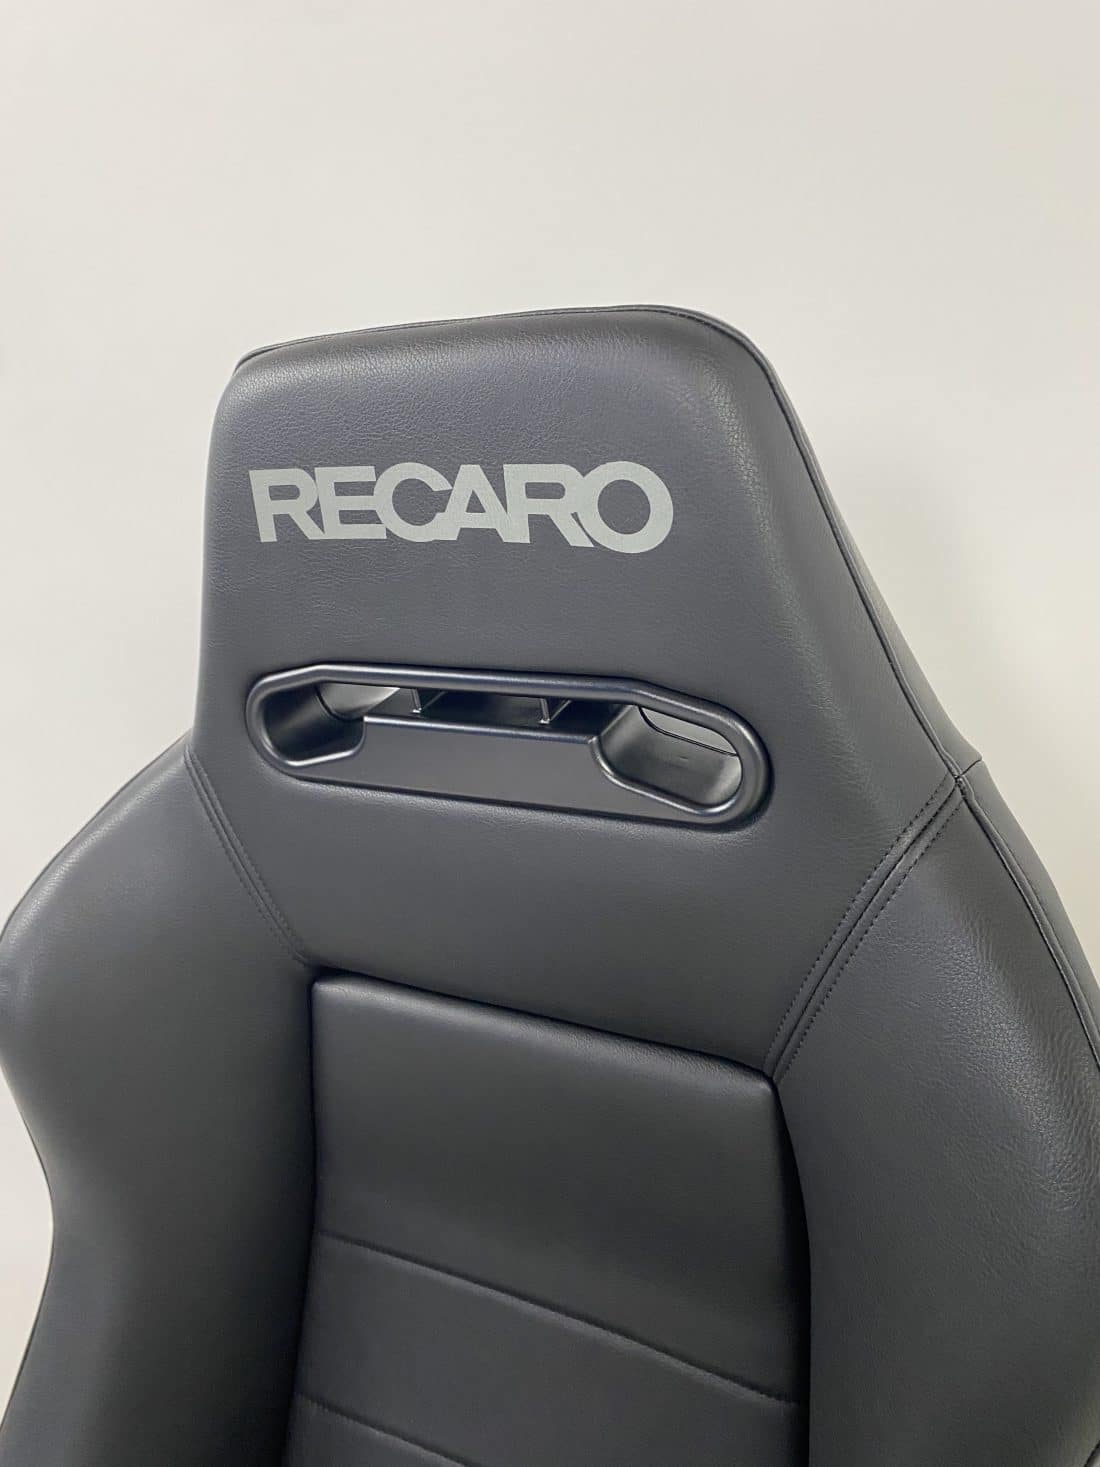 Conteneur Trp Post Data Trp Post Id 12144 Recaro Sr5 Speed Faux Leather Black Trp Post Container